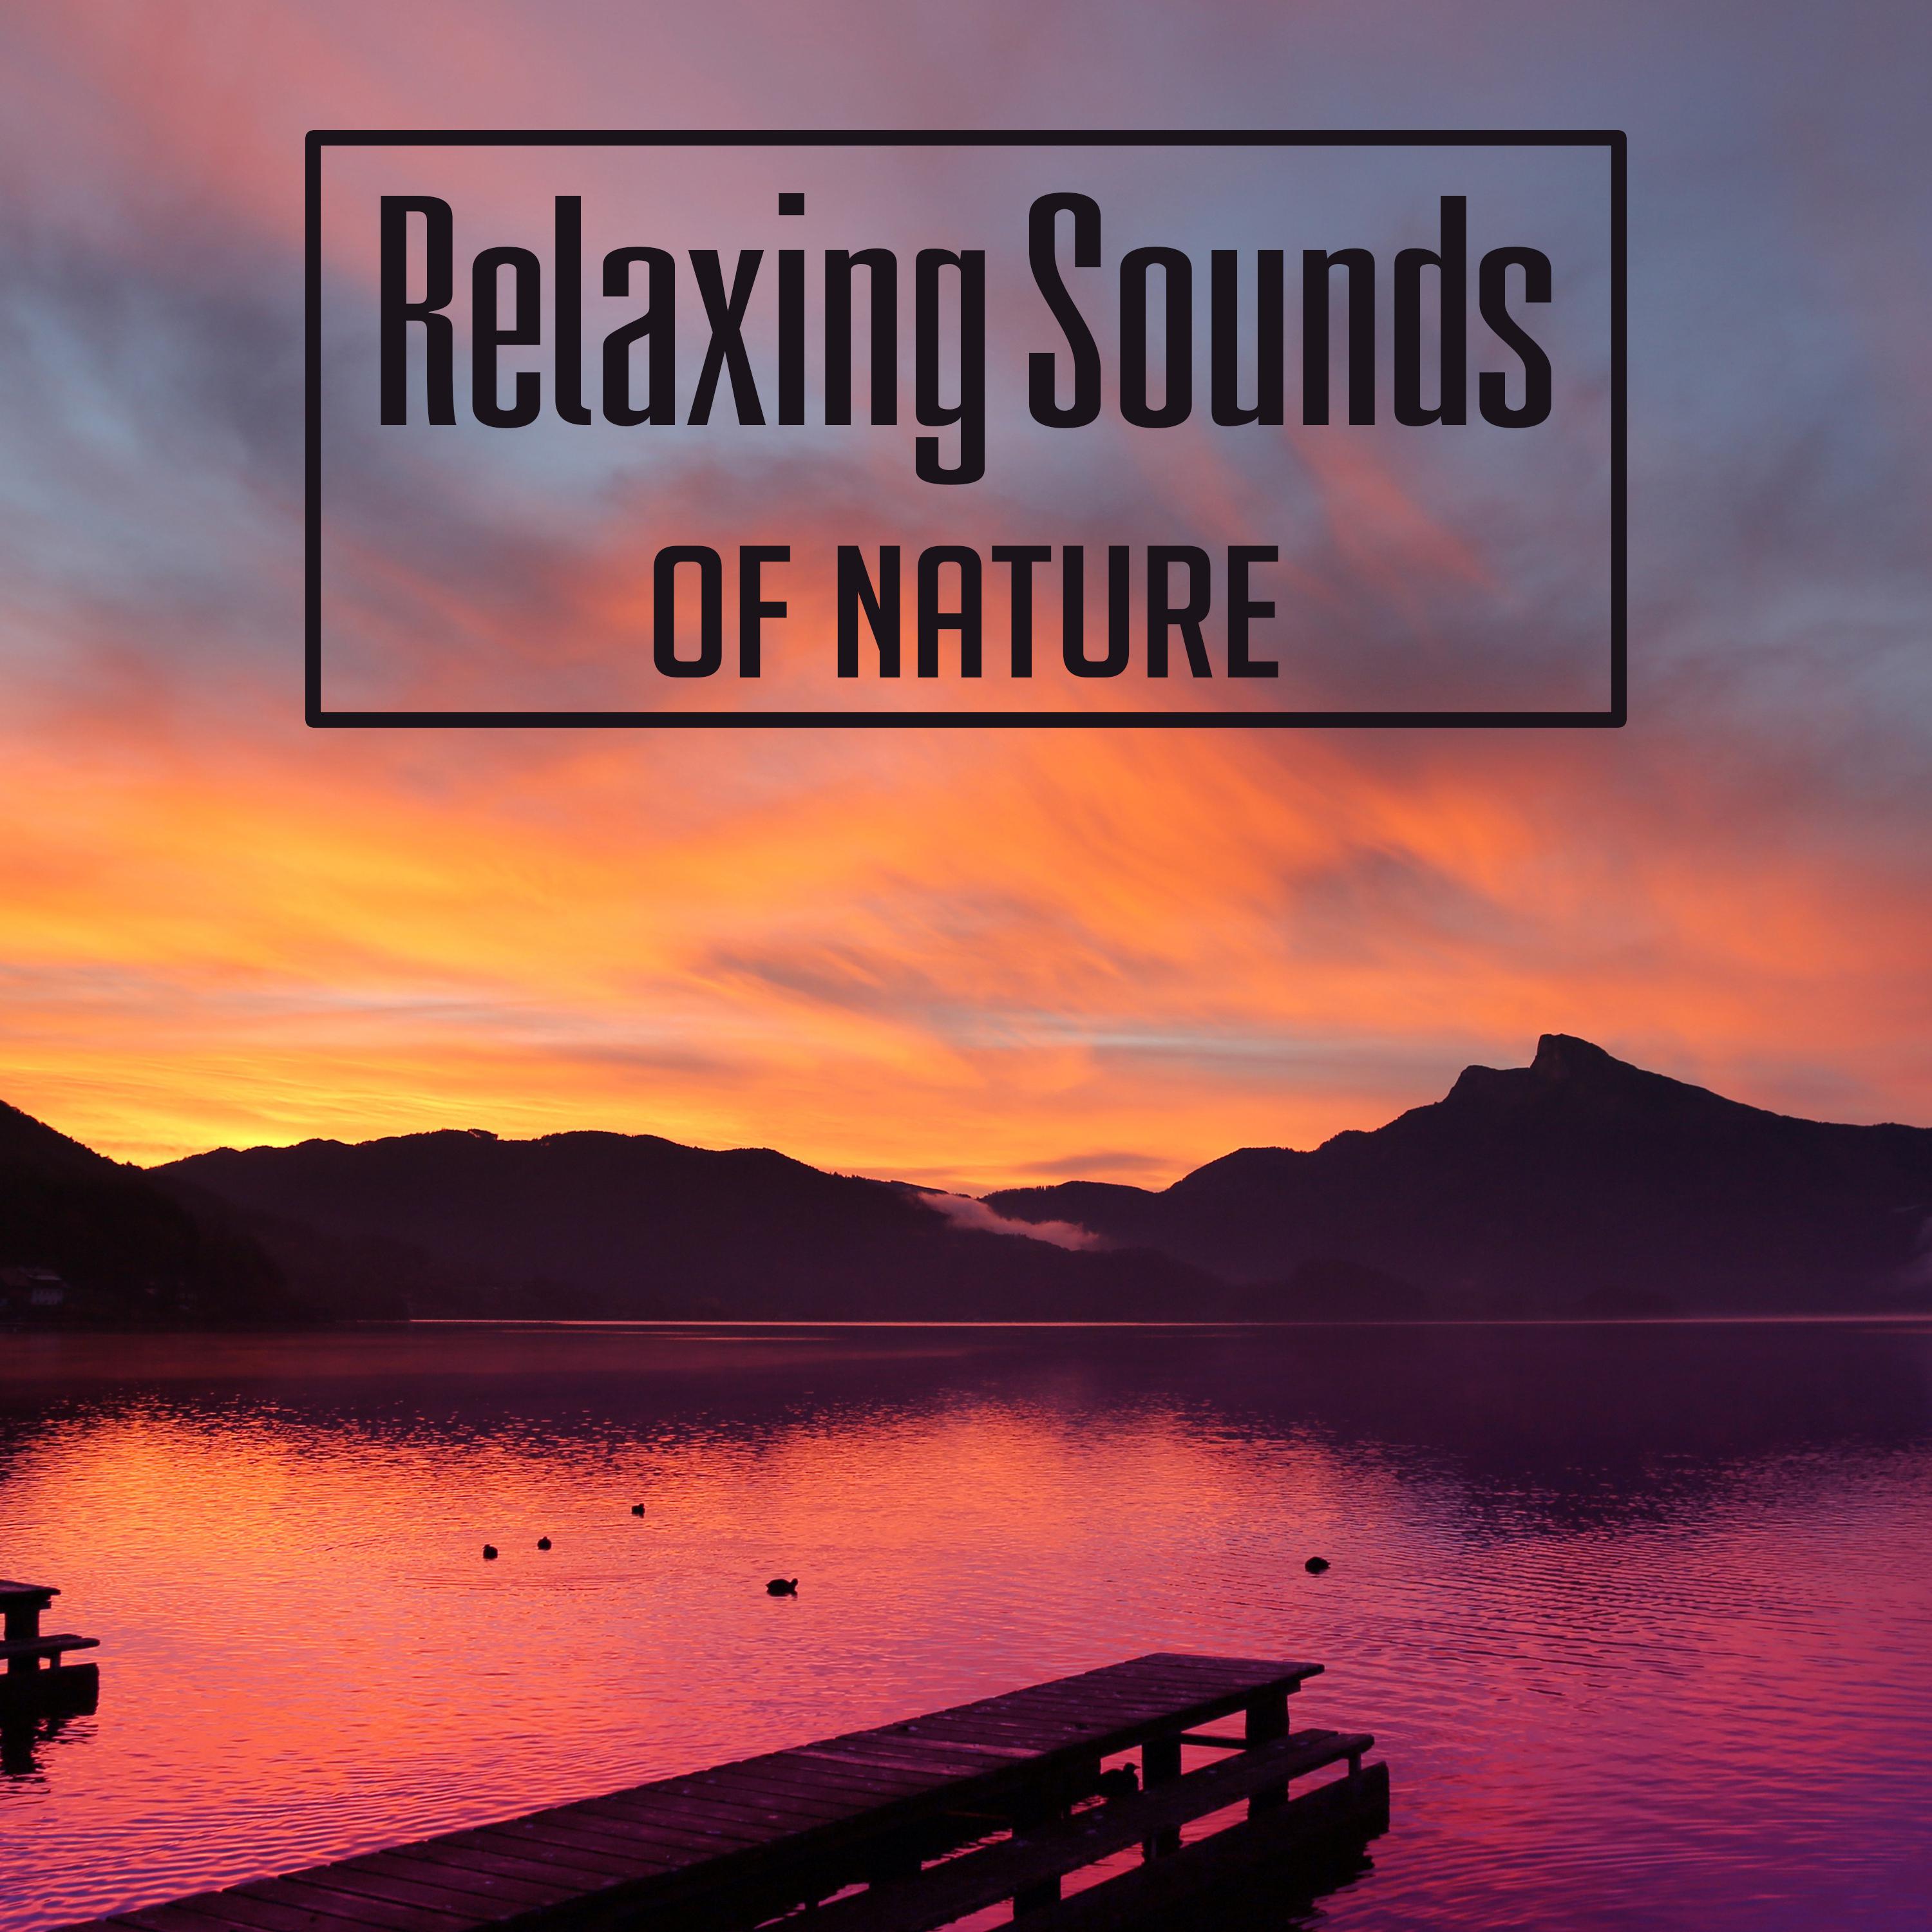 Relaxing Sounds of Nature – Soothing Sounds, New Age Relaxation, Mind Calmness, Chill Yourself